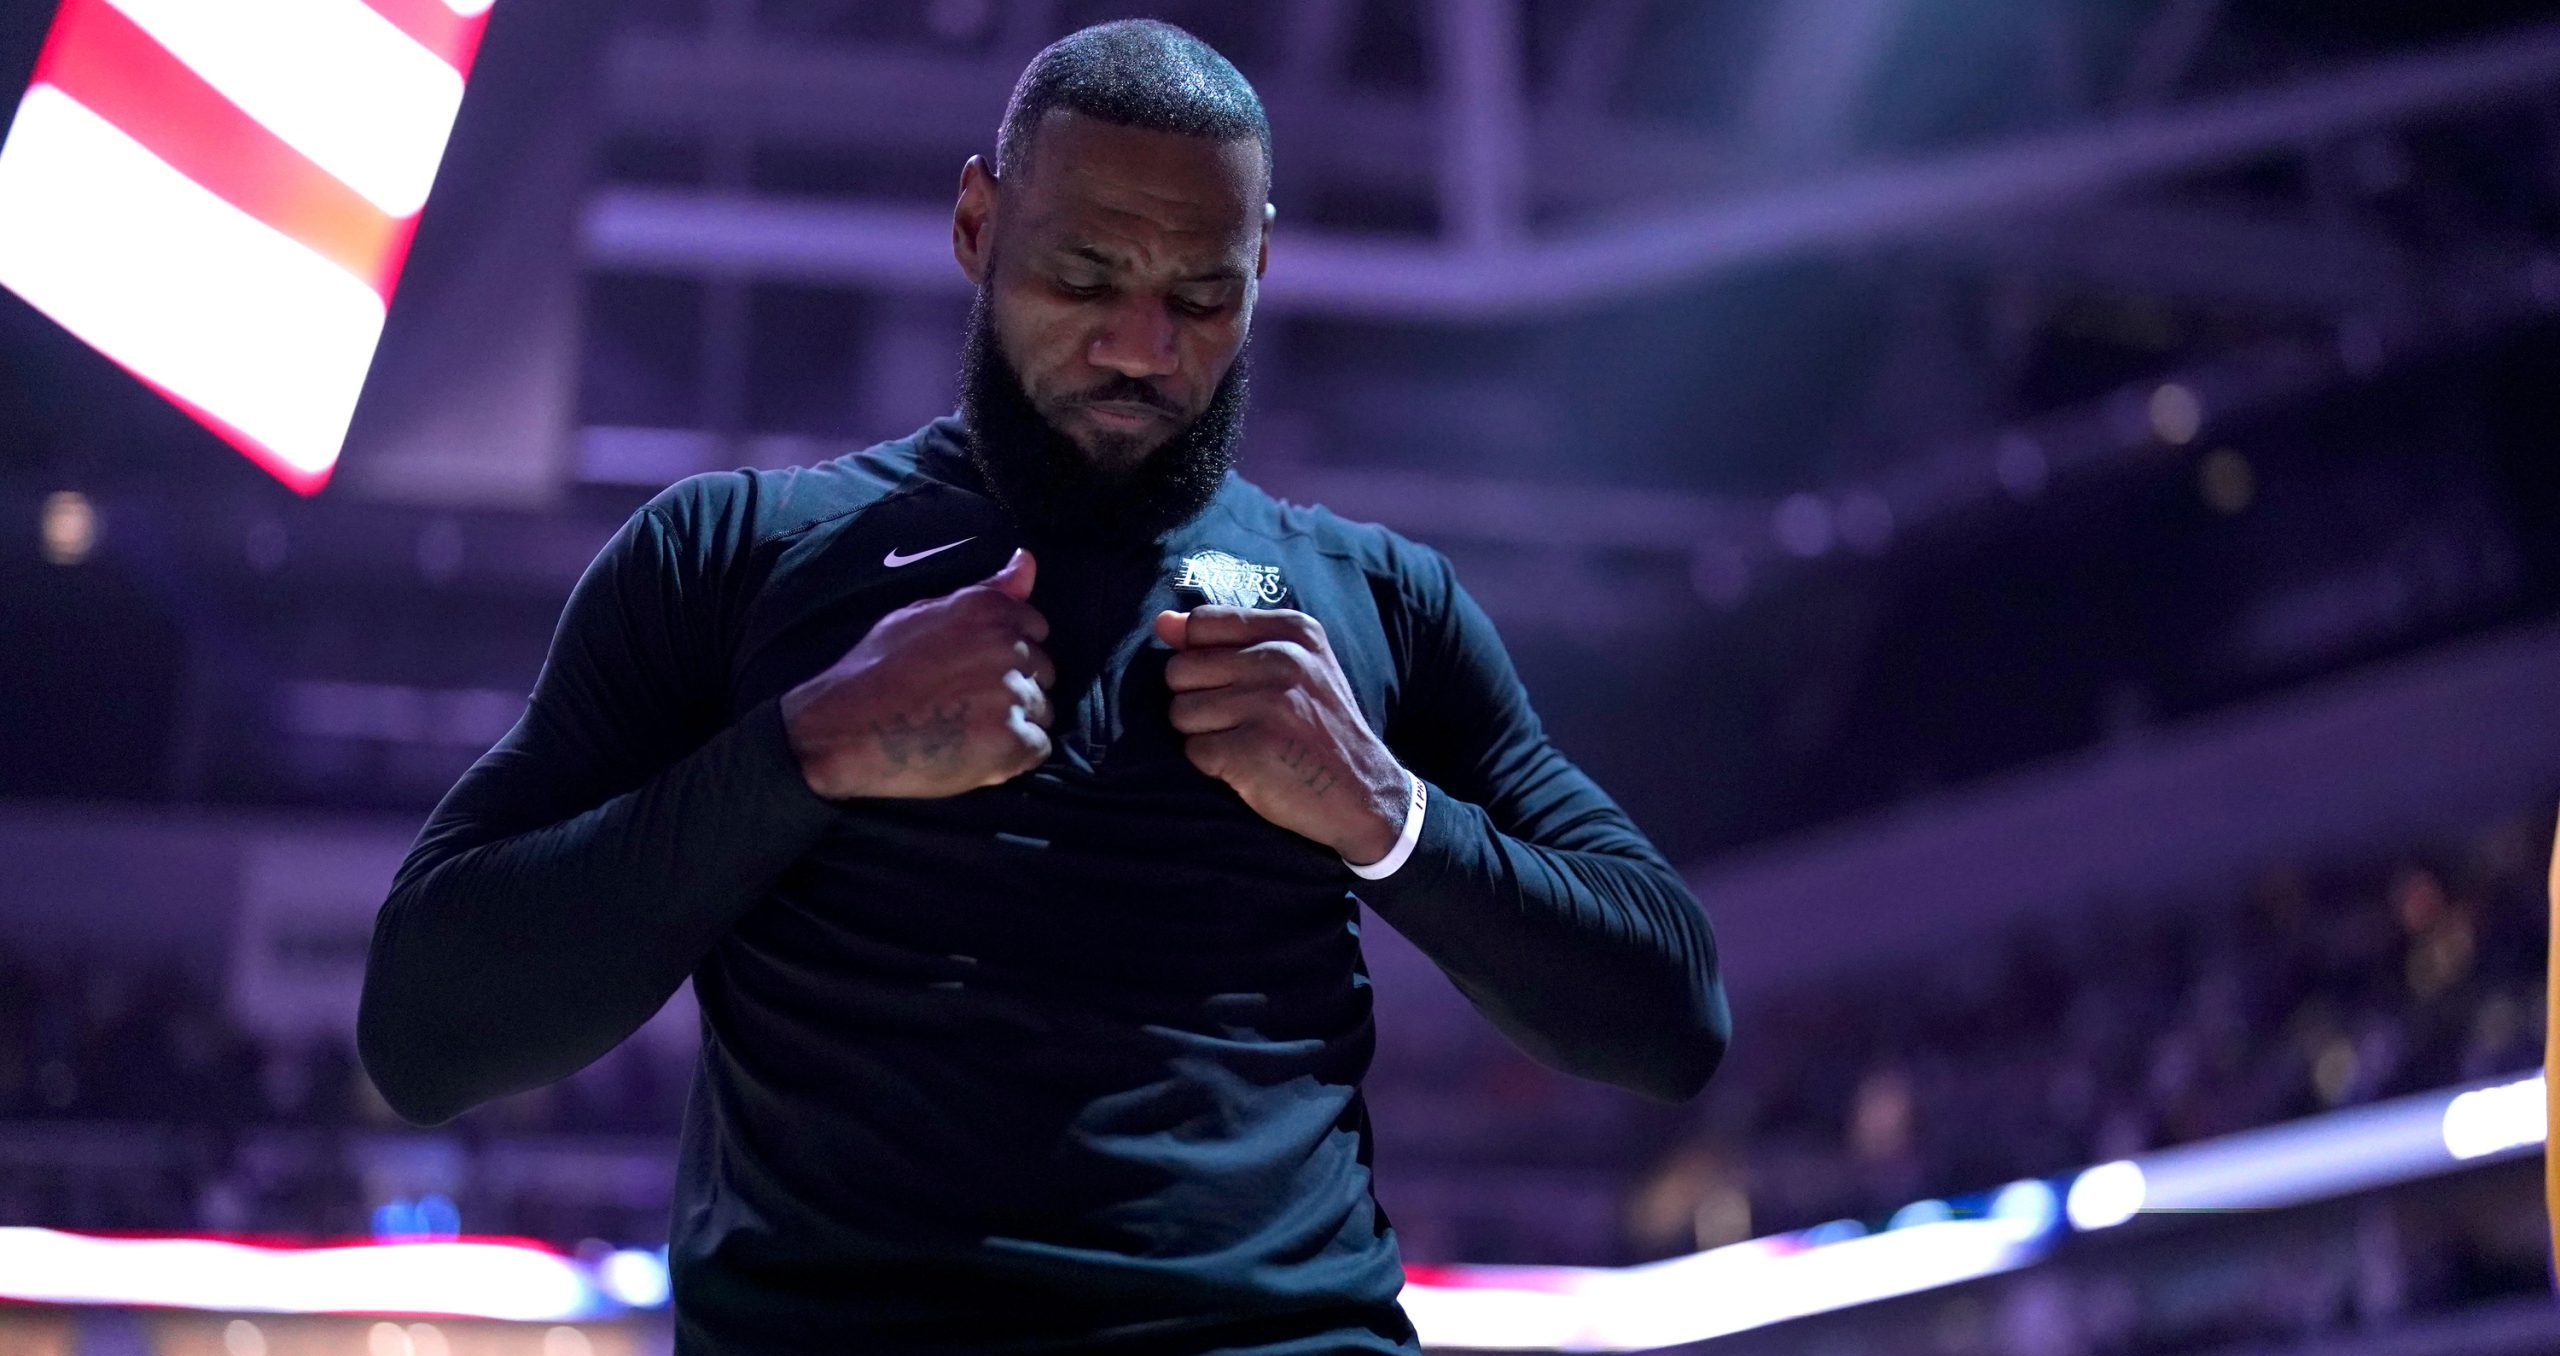 Oct 29, 2023; Sacramento, California, USA; Los Angeles Lakers forward LeBron James (23) stands on the court during the playing of the national anthem against the Sacramento Kings at the Golden 1 Center. Mandatory Credit: Cary Edmondson-USA TODAY Sports